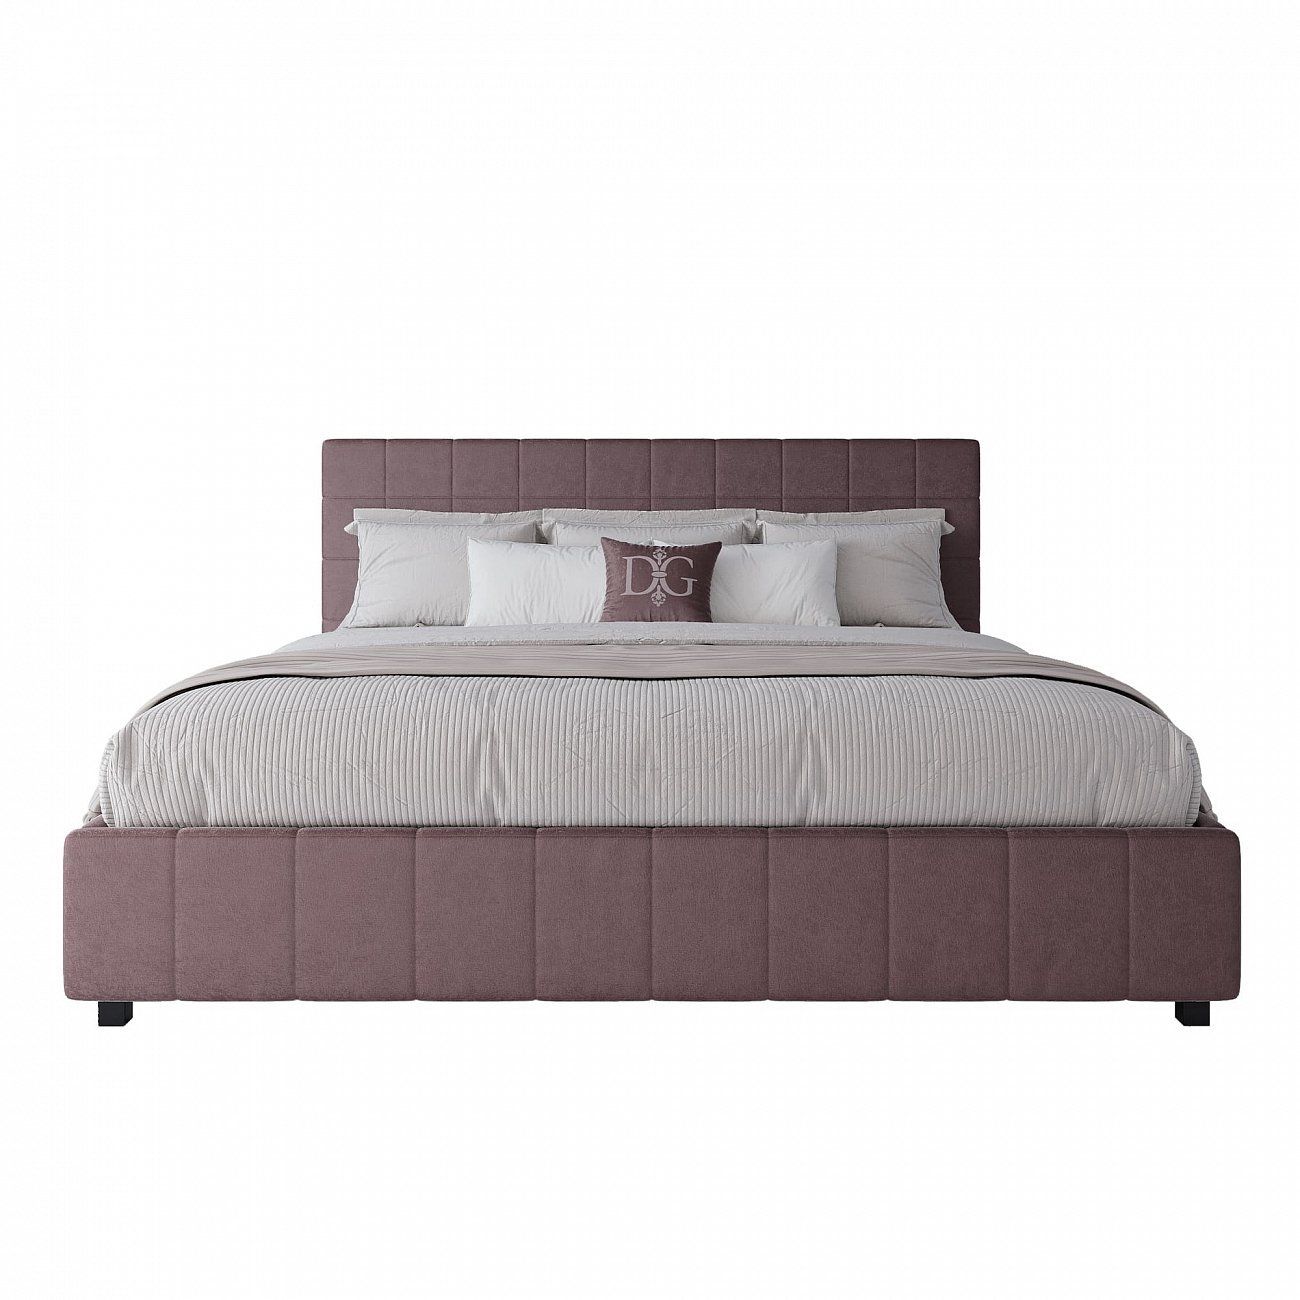 Large Bed 200x200 Shining Modern dusty rose